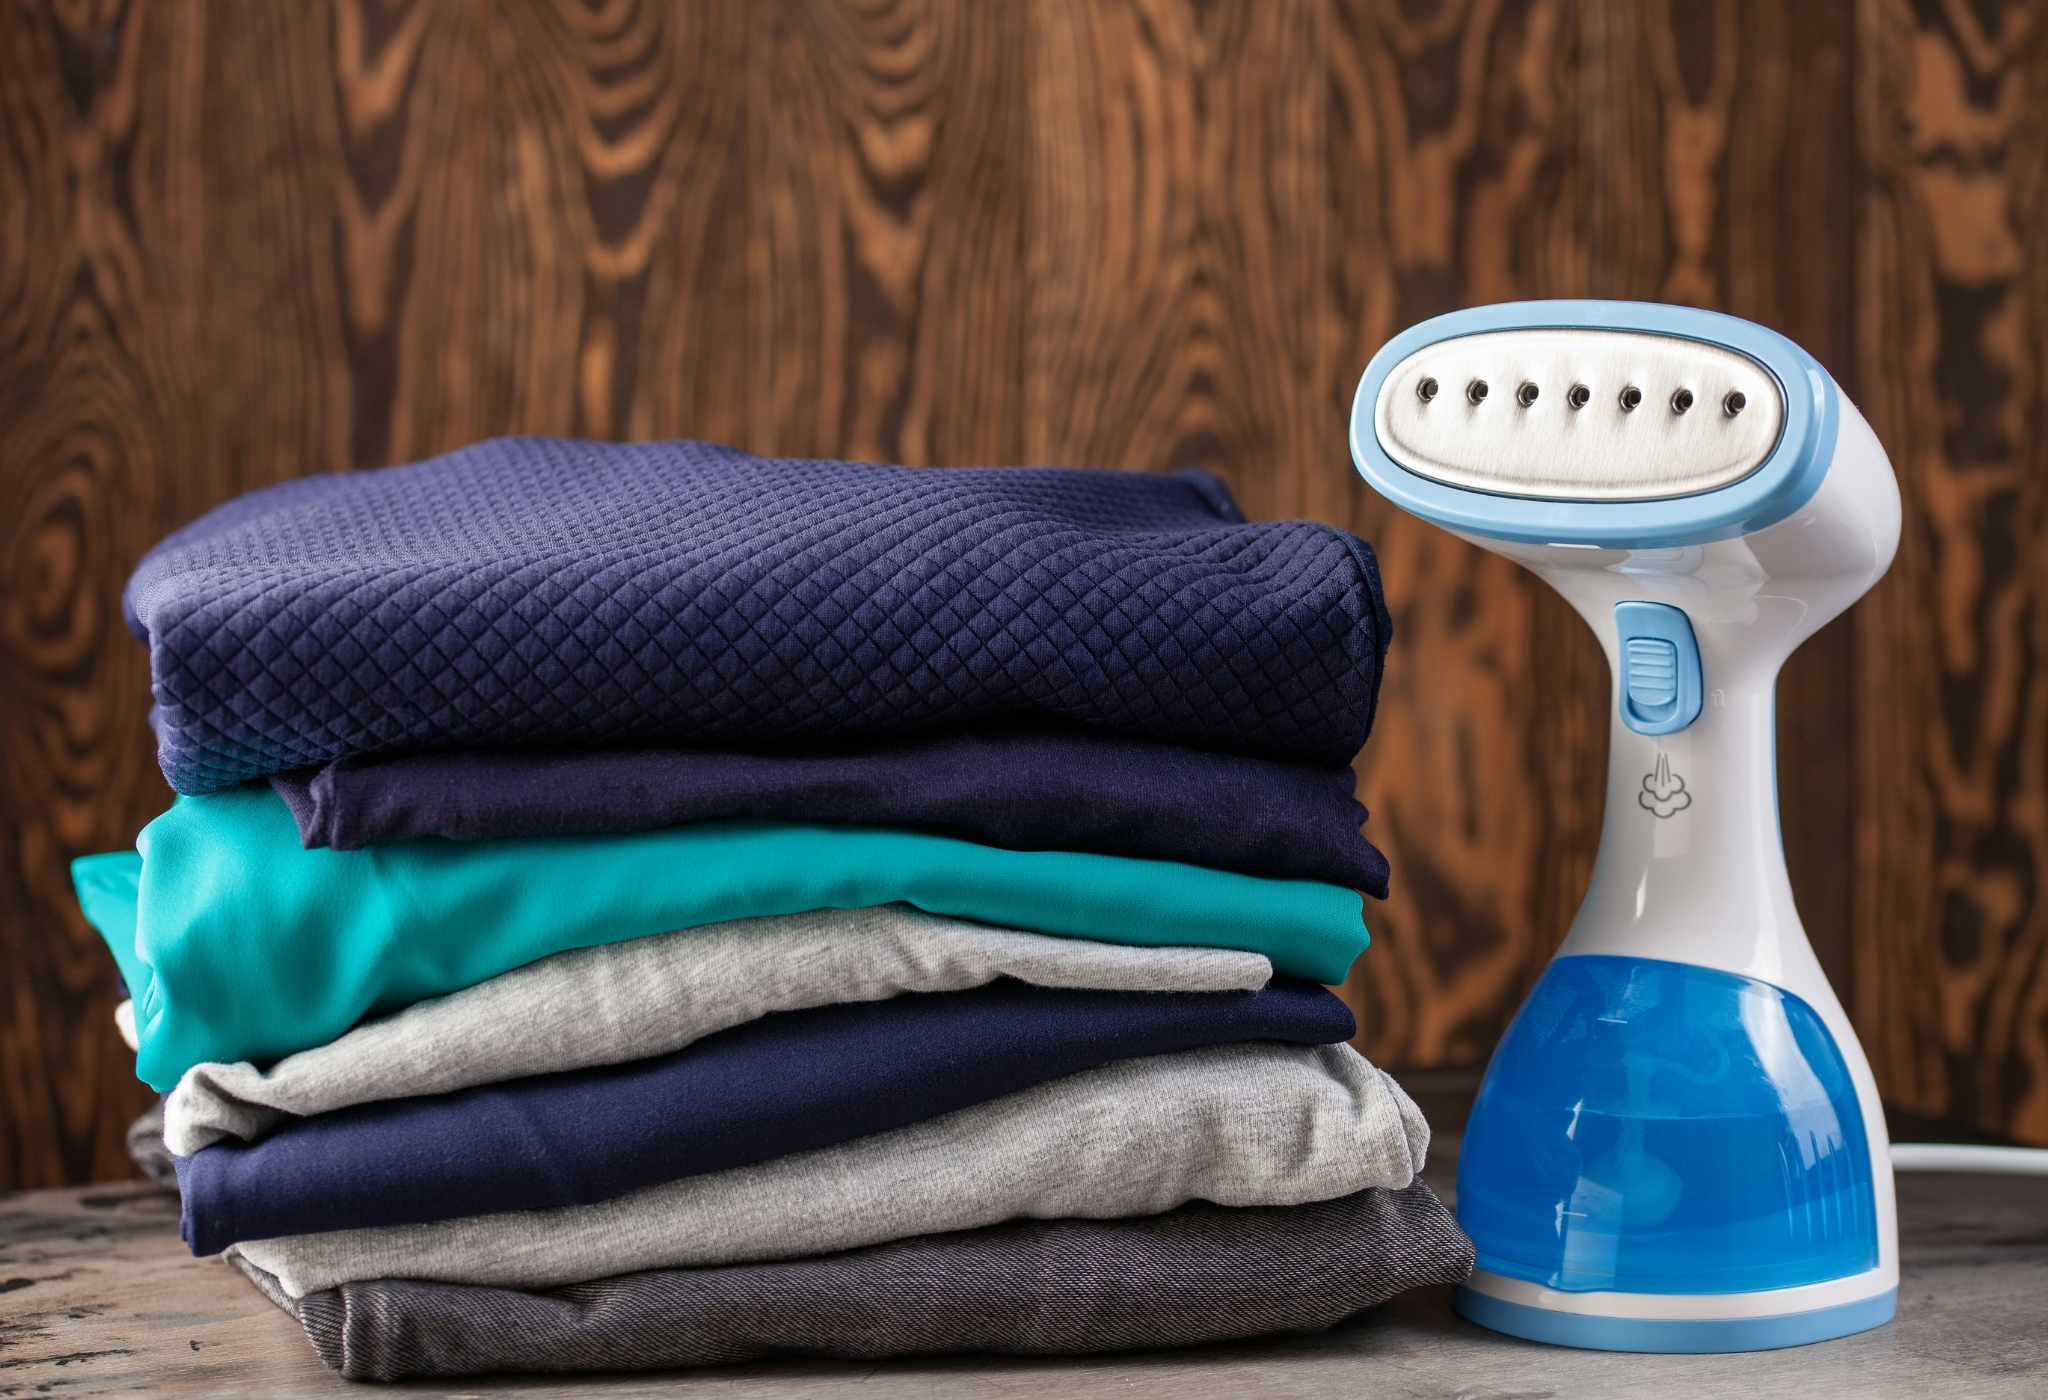 How To Avoid The Expensive Dry Clean Prices (2021) Use a Wrinkle Release Product or a Steamer